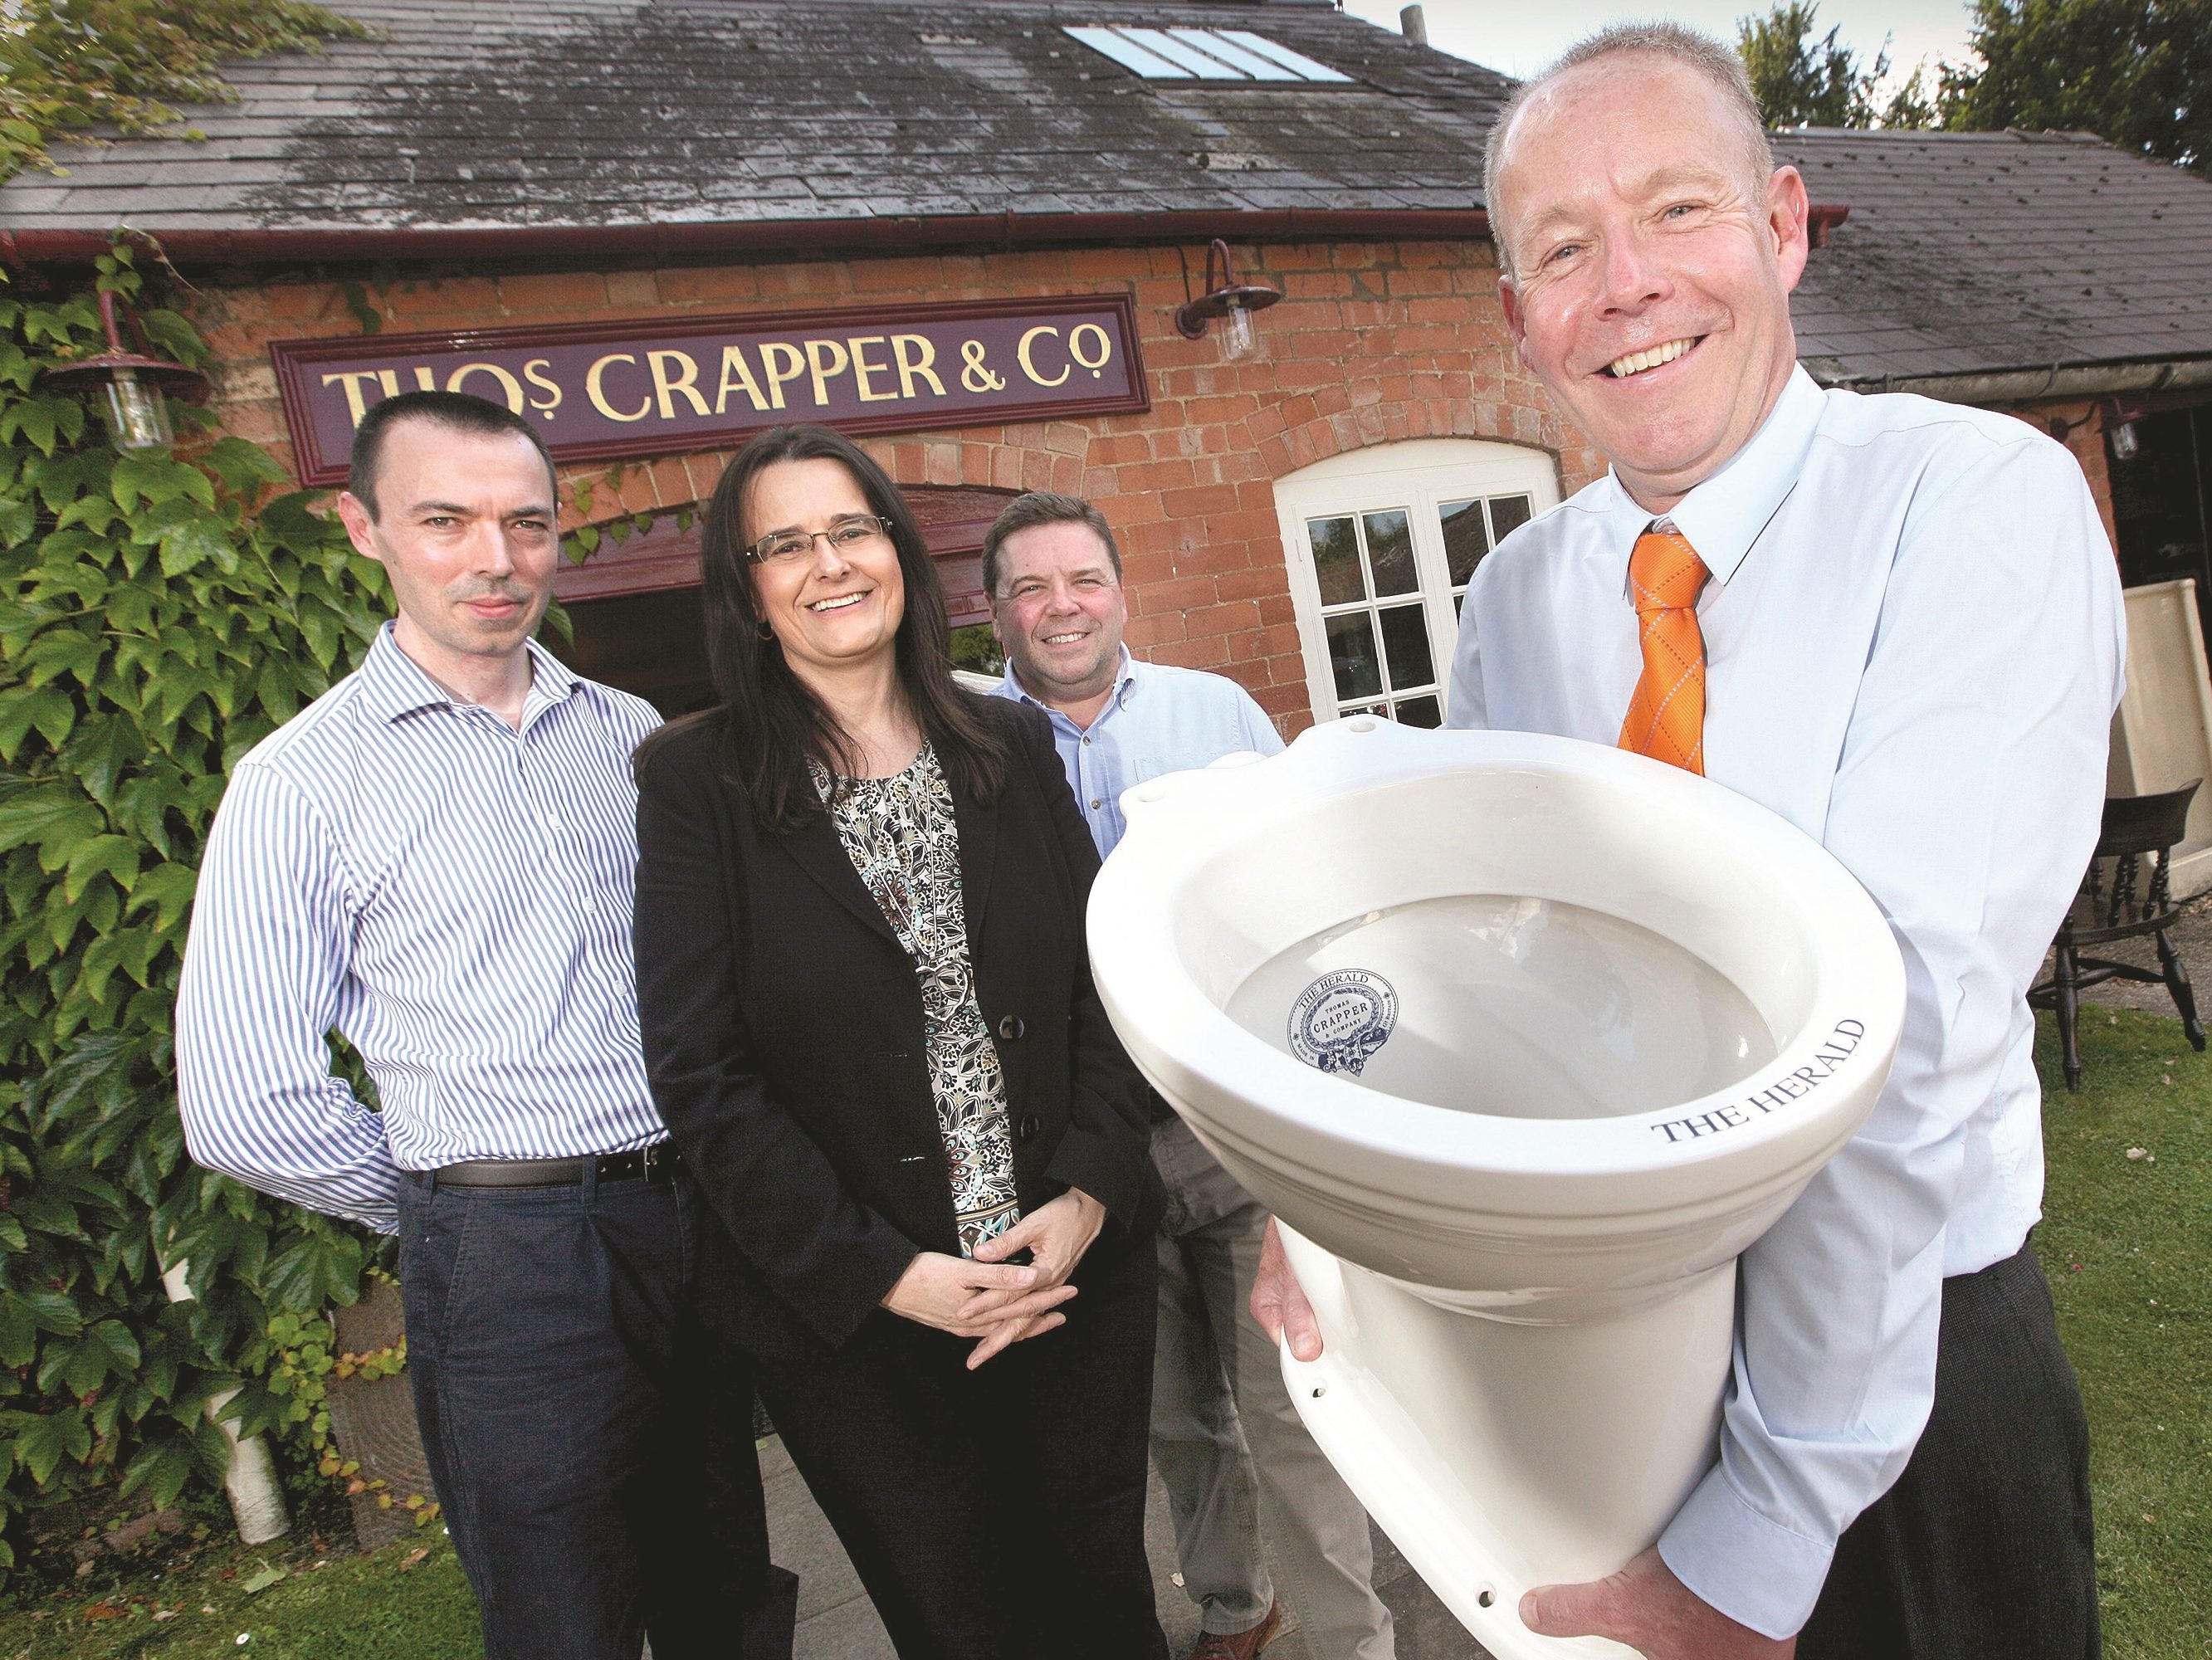 Herald staff with the new toilet pan from Thomas Crapper